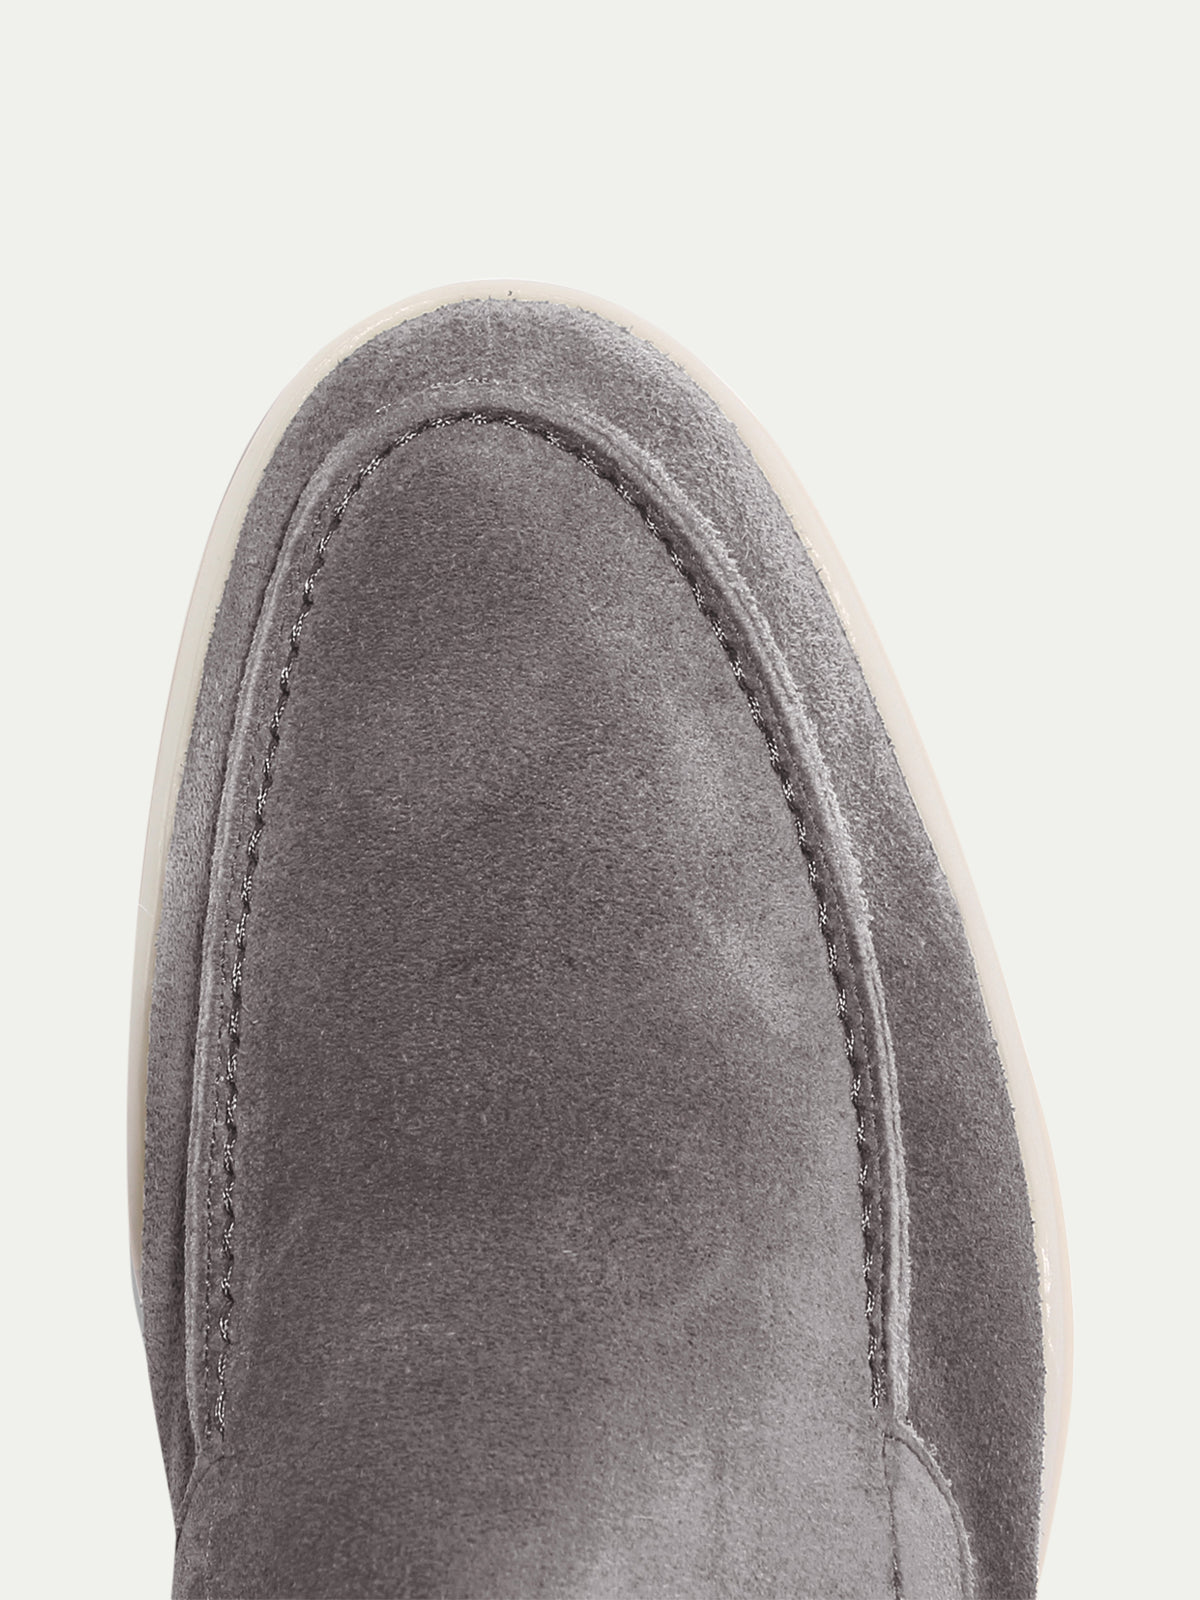 Aurelien_Yacht_Loafers_men_suede_shoes_summer_italy_grey4_7d002e71-2f93-415a-bfd6-08d4bed9f63e.jpg